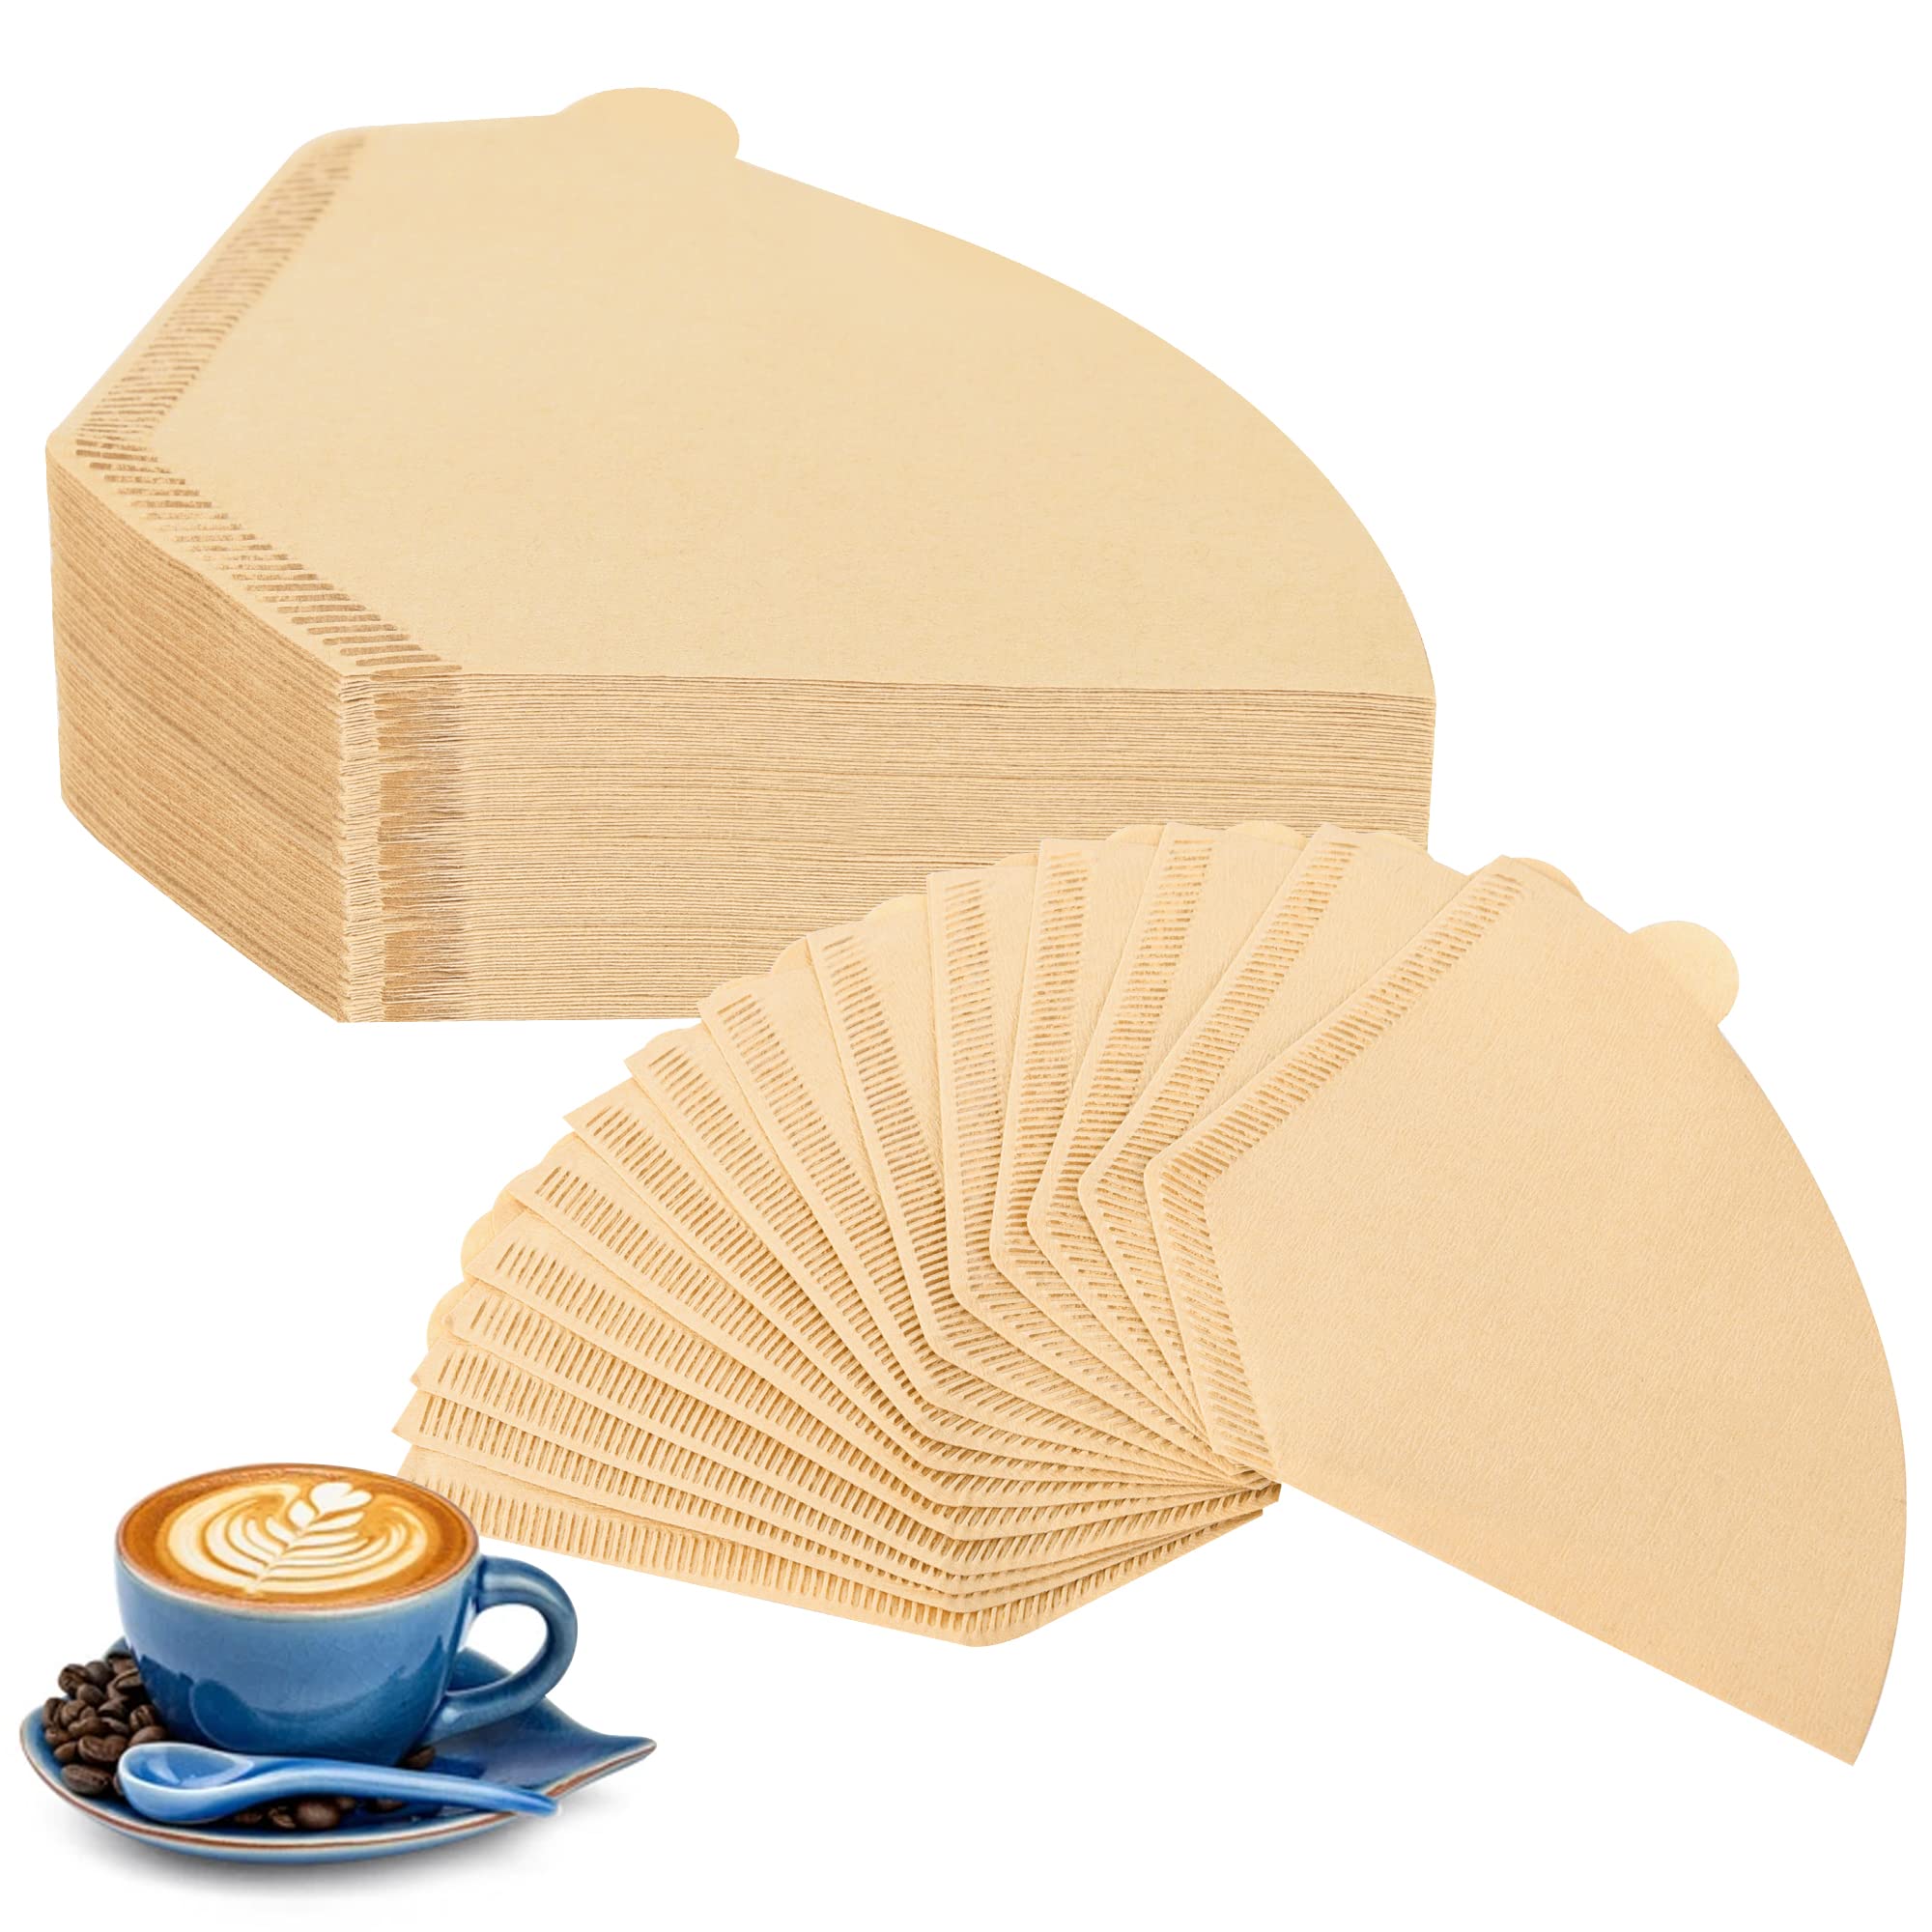 Coffee Filters #4,200 Count Disposable Coffee Filters 8-12 Cup,No Blowout,Unbleached Natural Coffee Filters 4 Cone Paper for Pour Over Coffer Makers/Coffee Dripper Cones